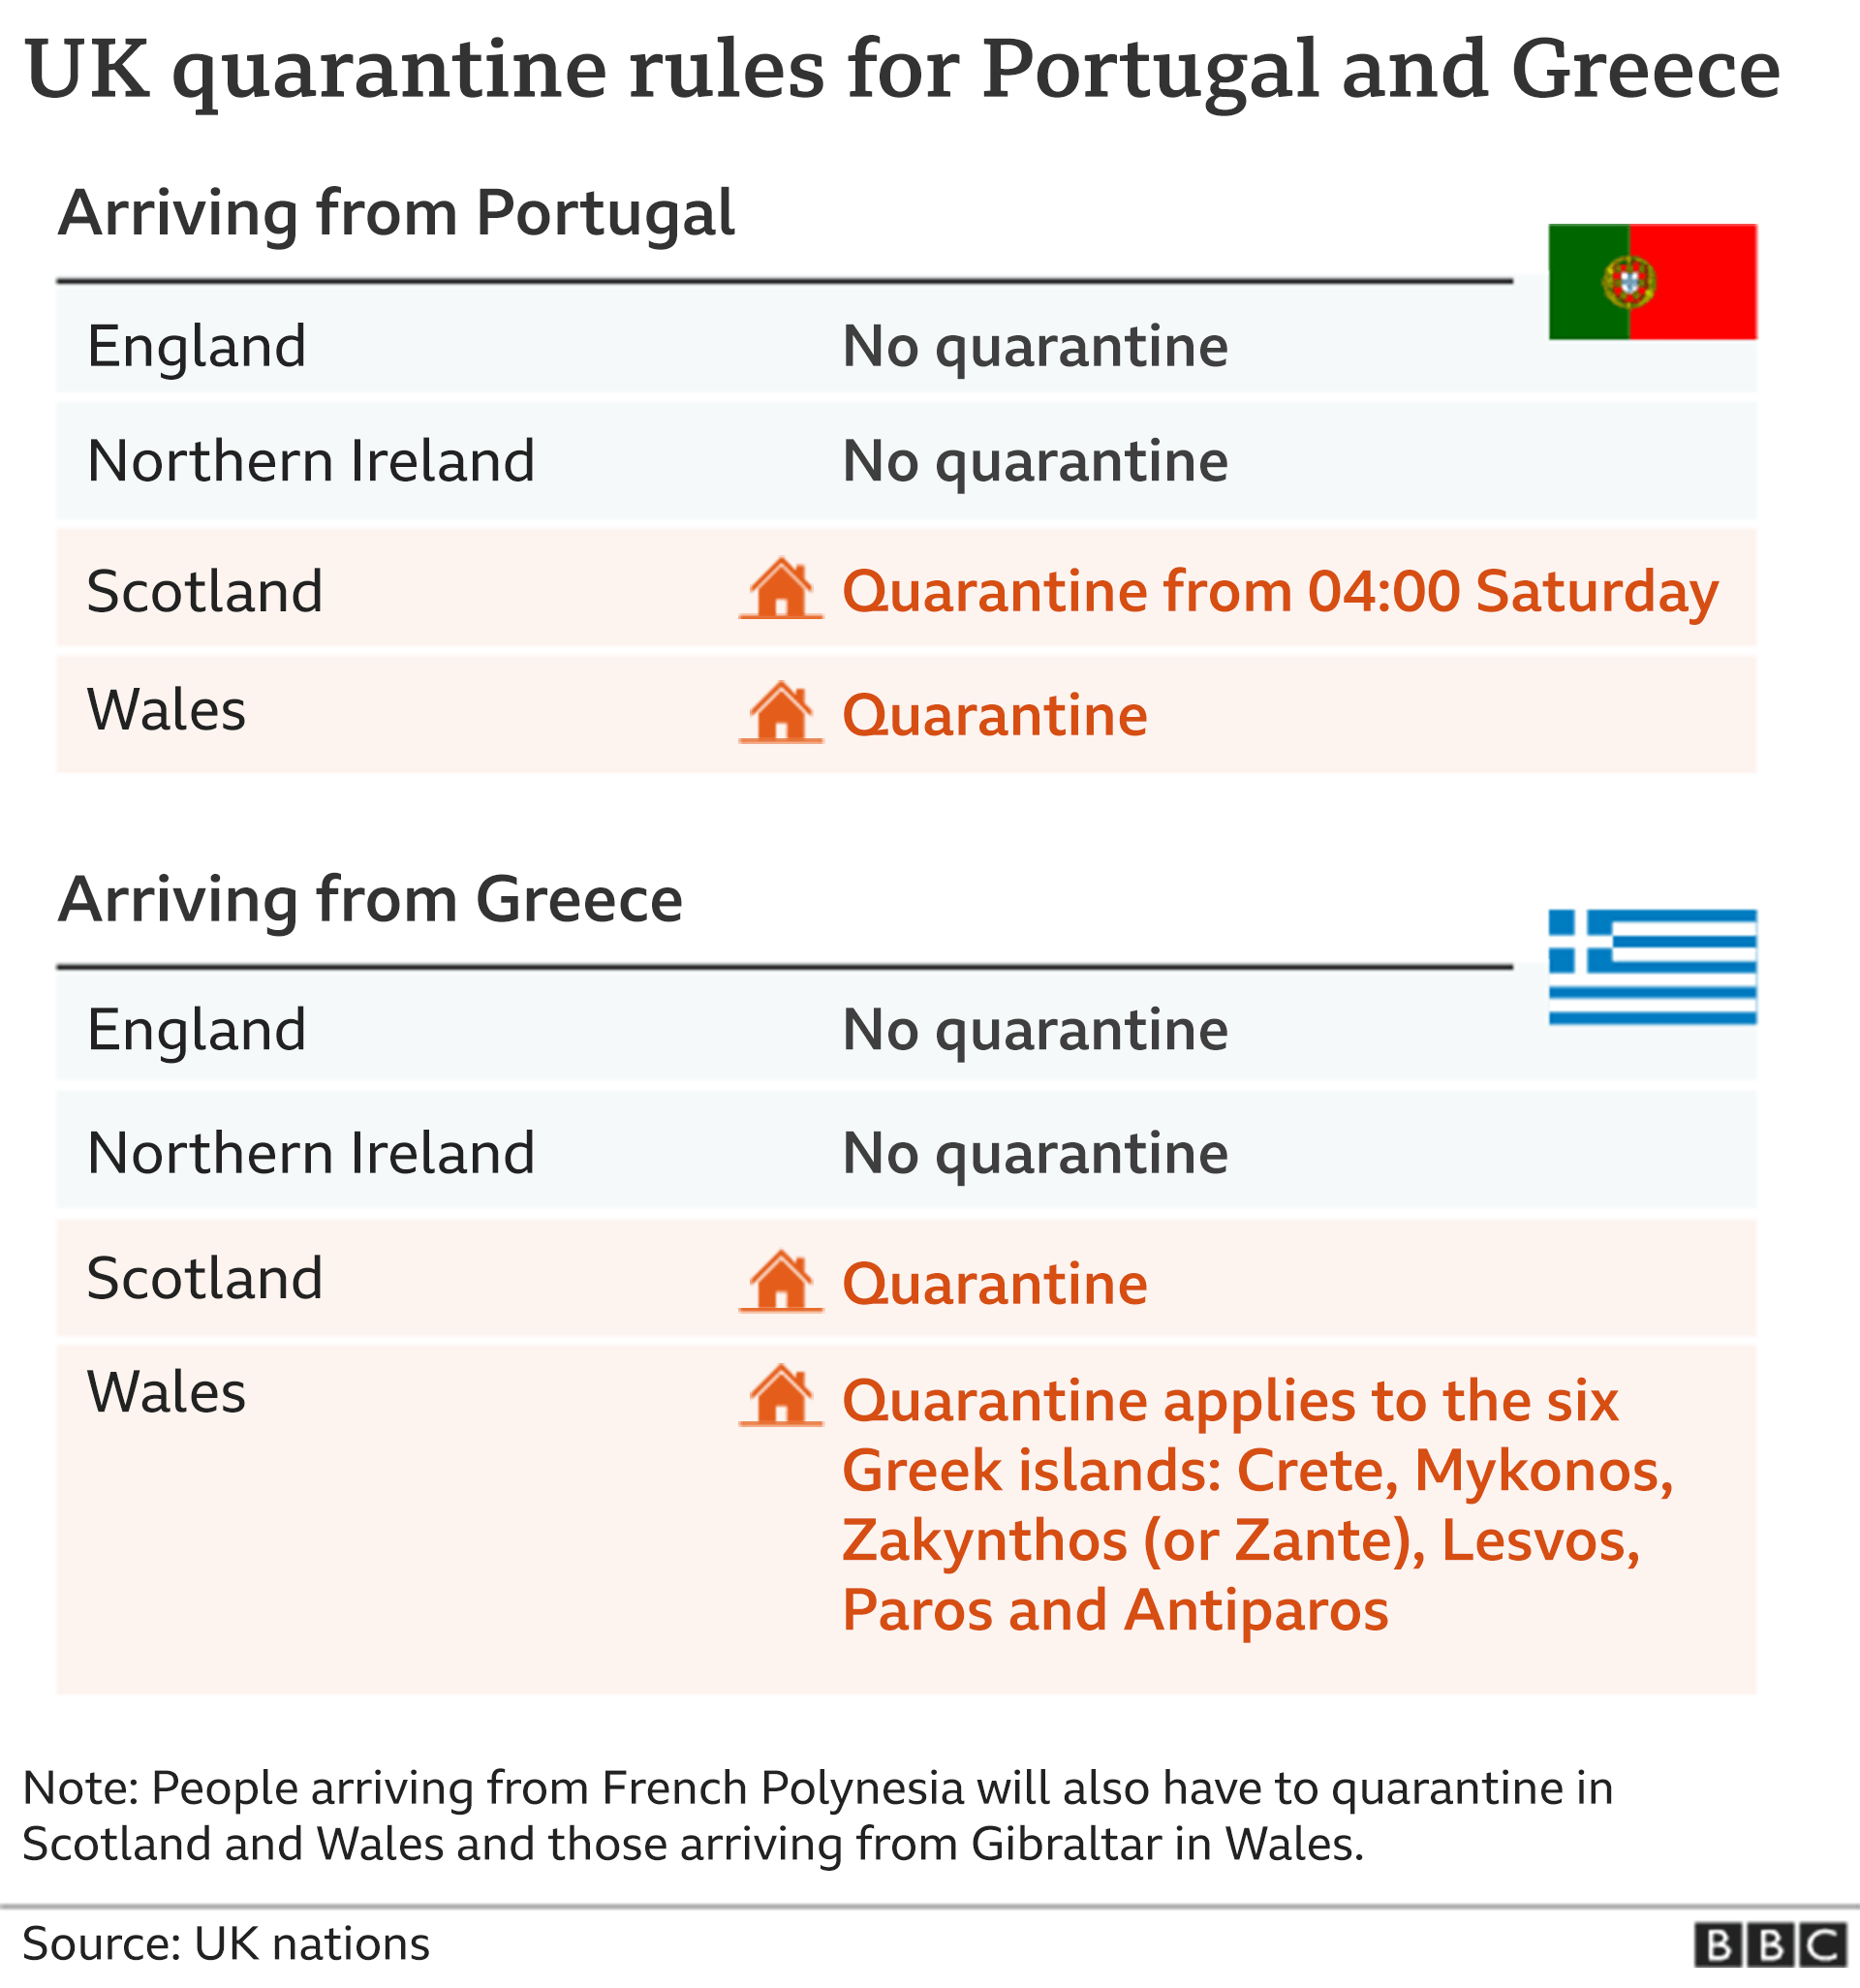 New foreign arrival restrictions for those arriving from Portugal and Greece, and Greek islands Crete, Mykonos, Zakynthos, Lesvos, Paros and Antiparos